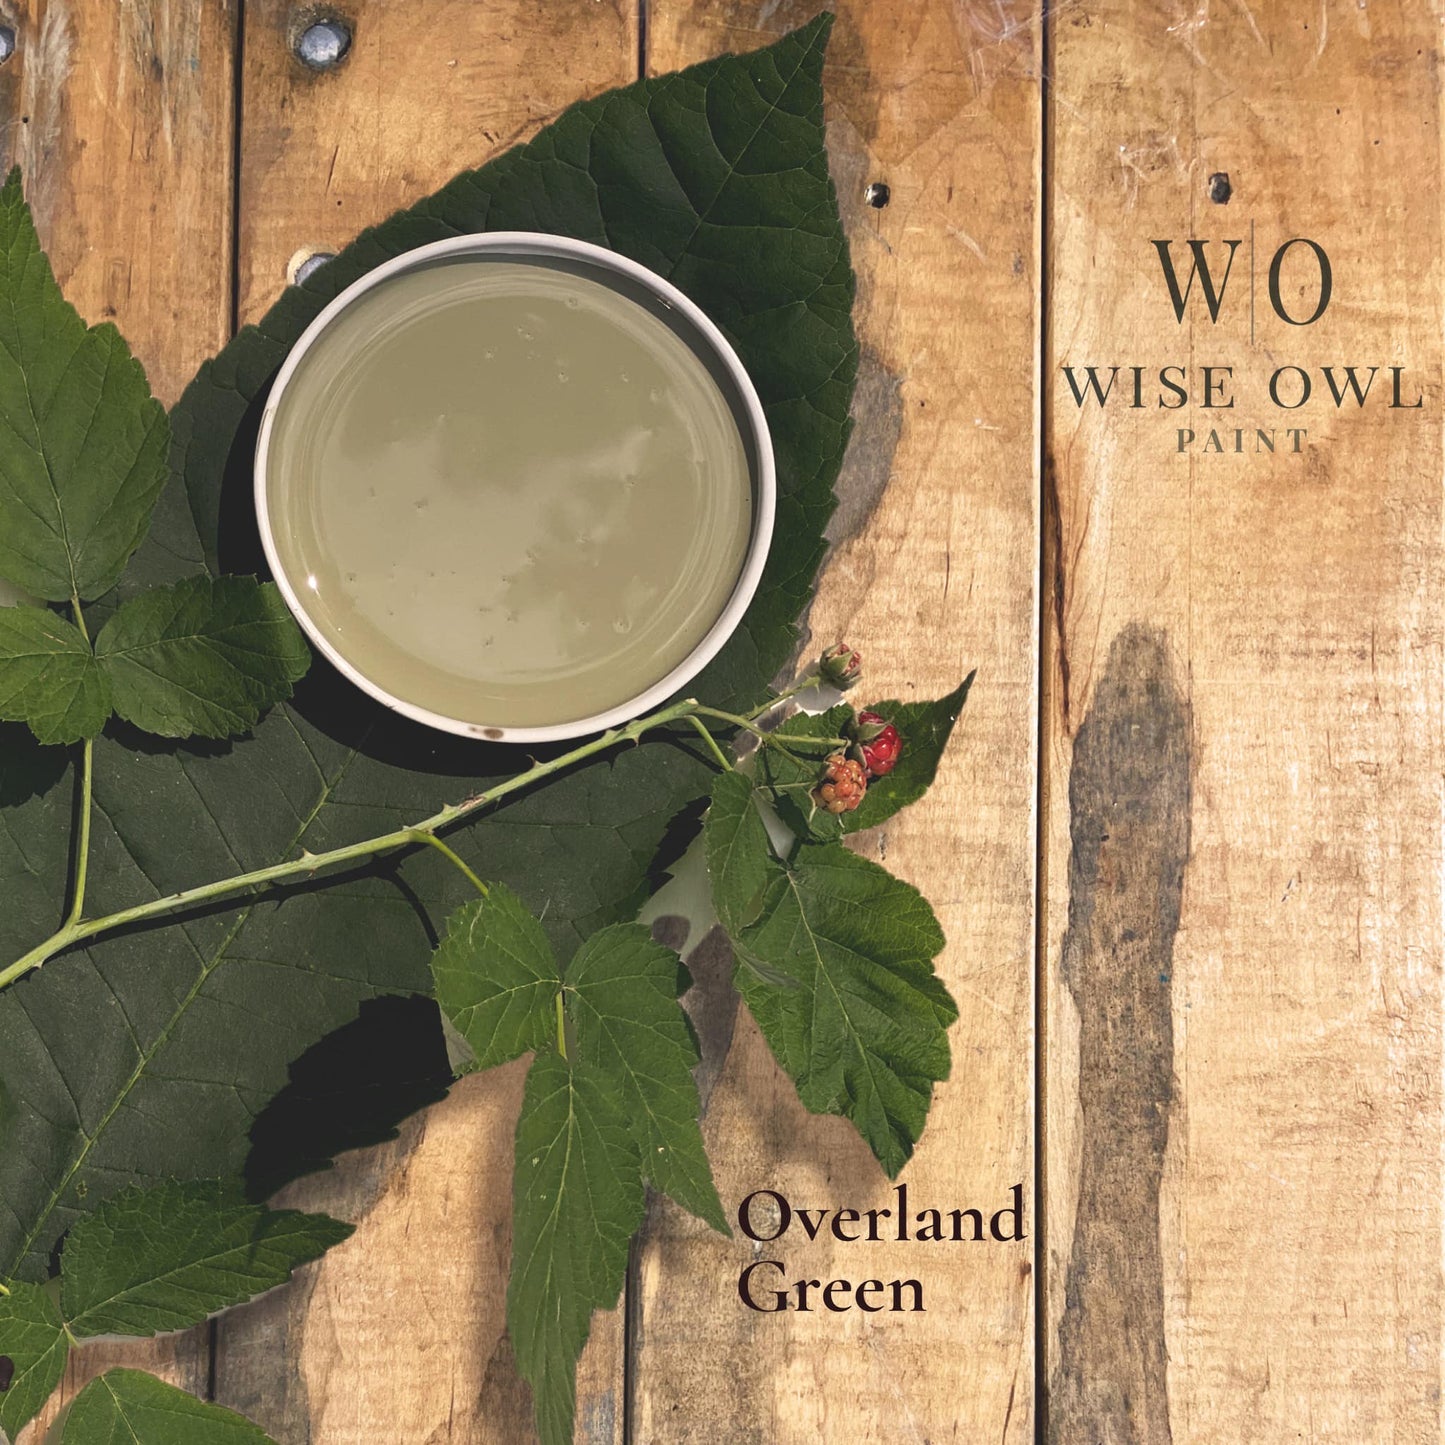 overland green paint swatch from wise owl paint one hour enamel wilderness collection. large green leaf background on a wood panel floor.